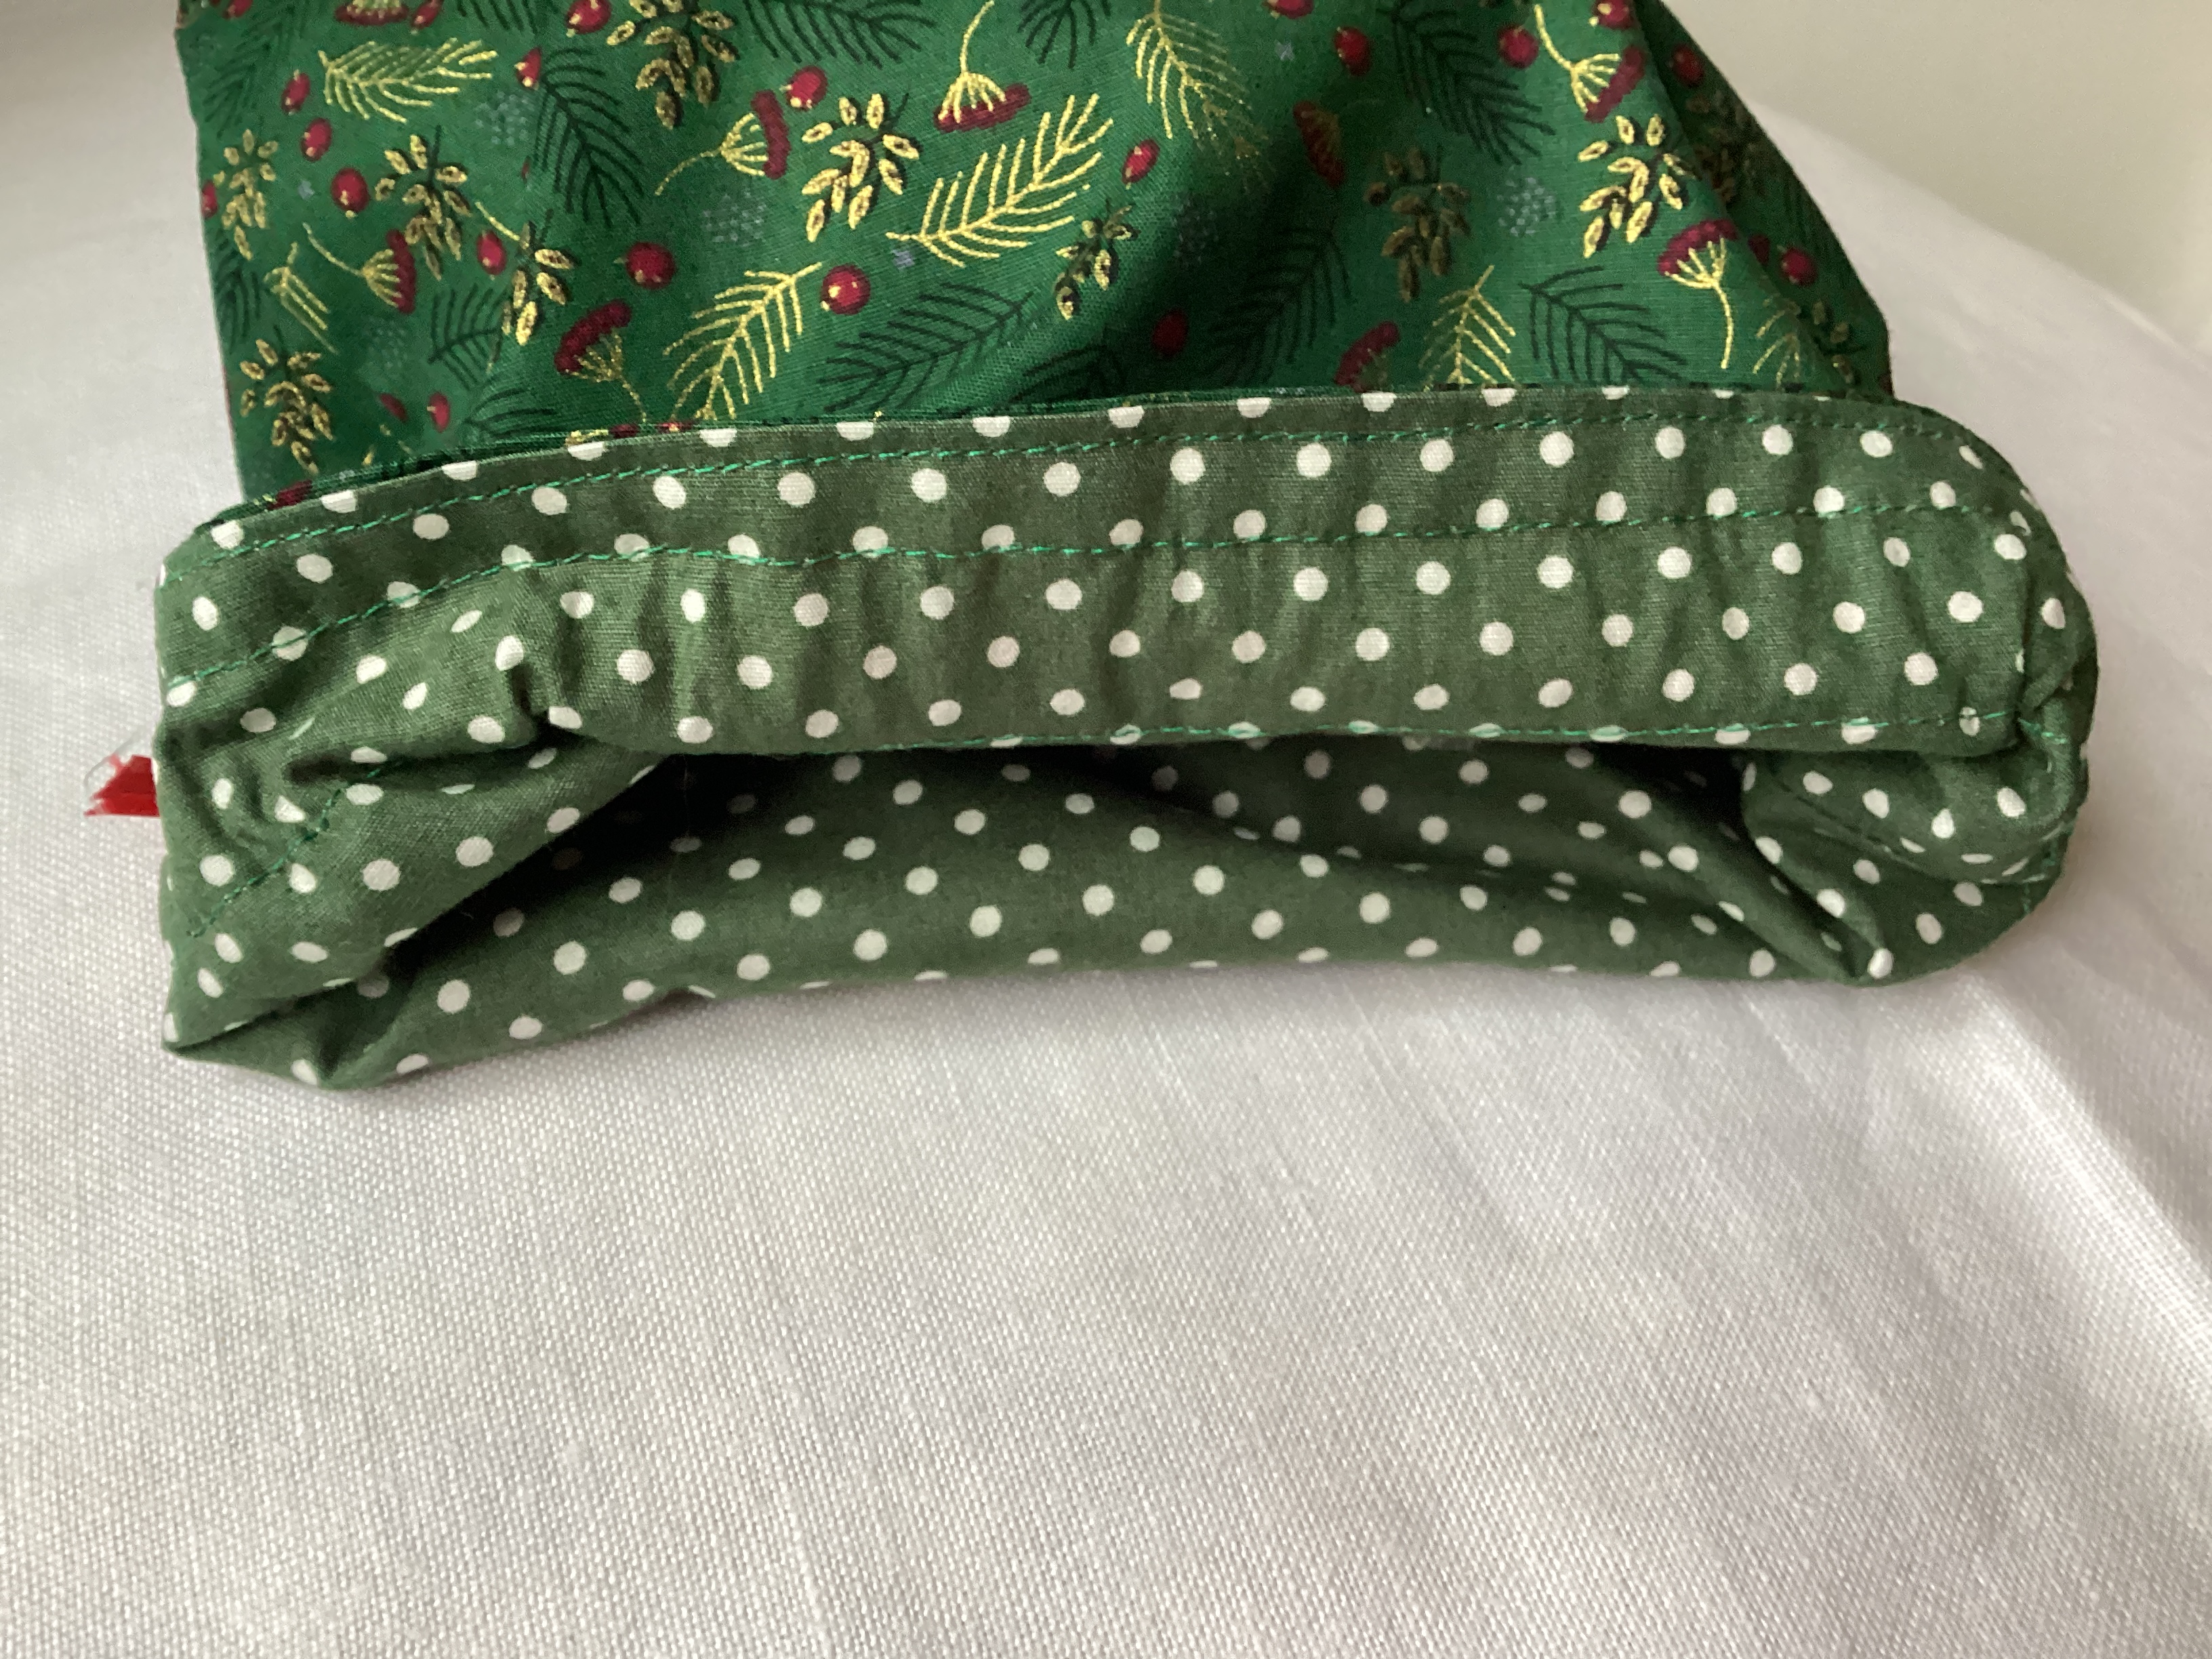 Christmas Gift Bag - green with leaves and berries